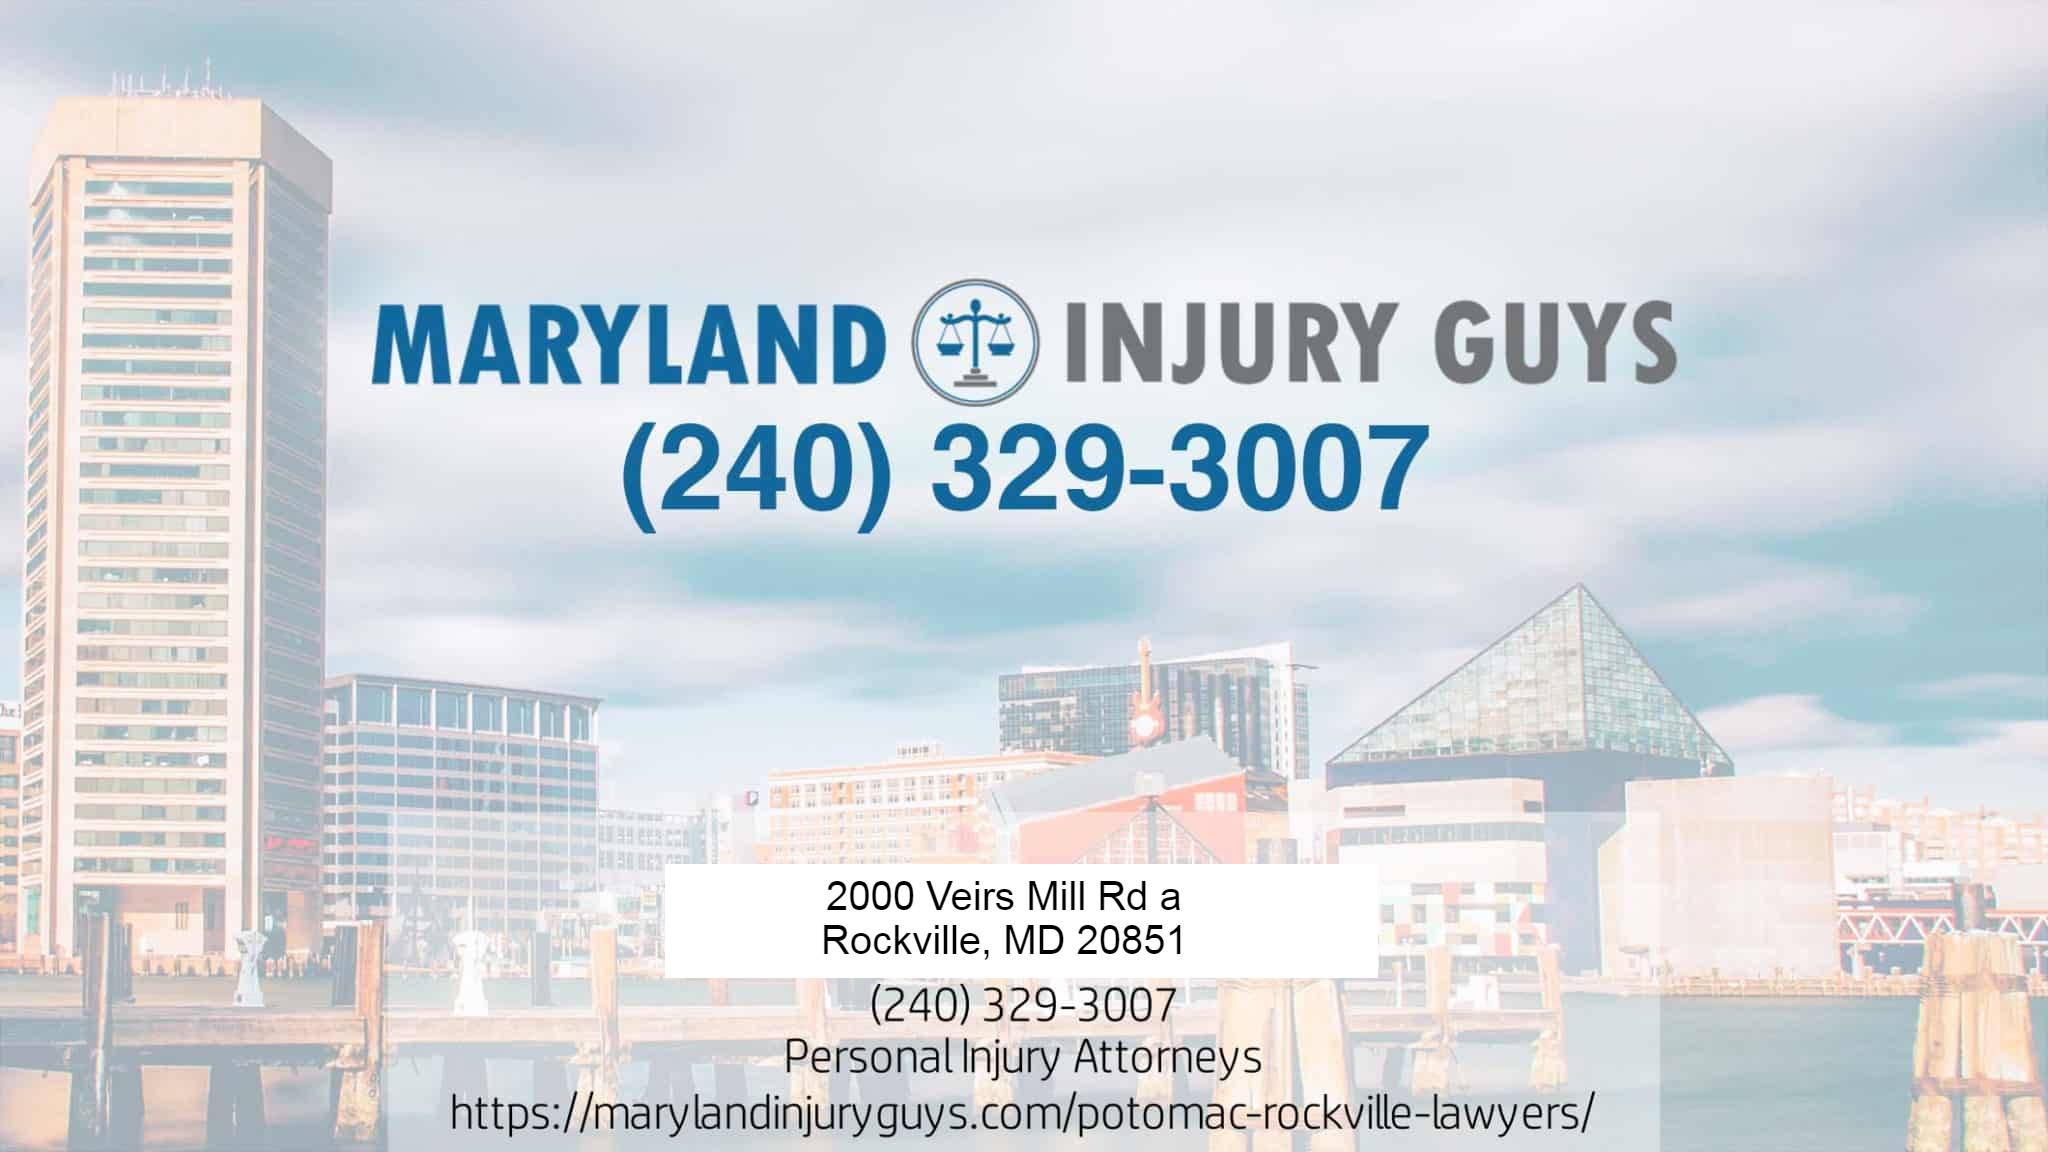 Workers-Compensation-Lawyer-Near-Me-Potomac-Maryland-Injury-Guys-1.jpg